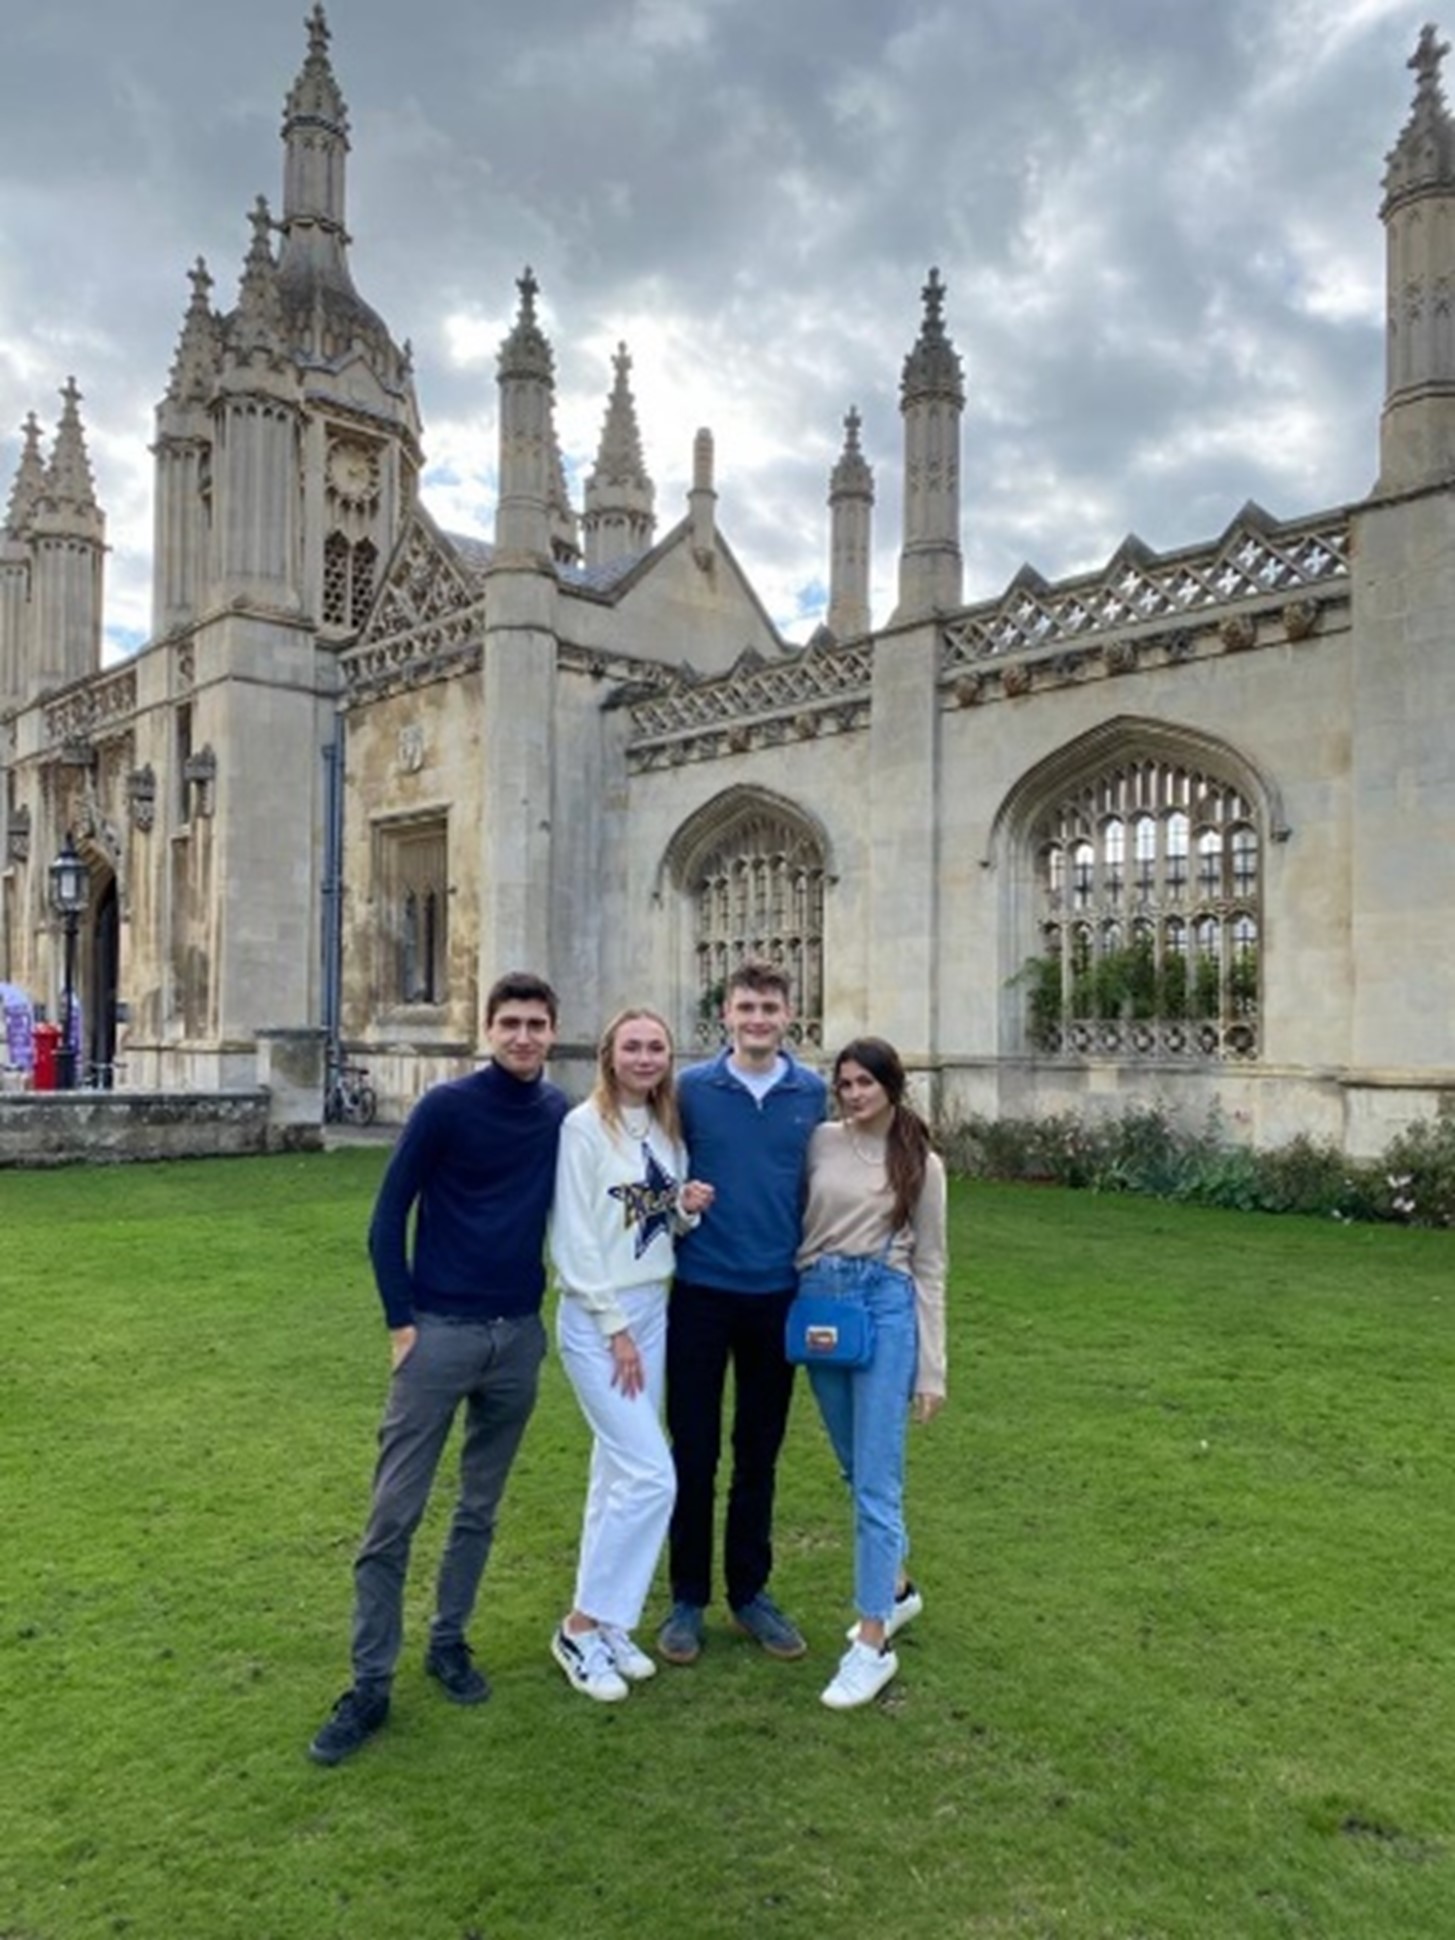 Four students on the lawn outside King's college